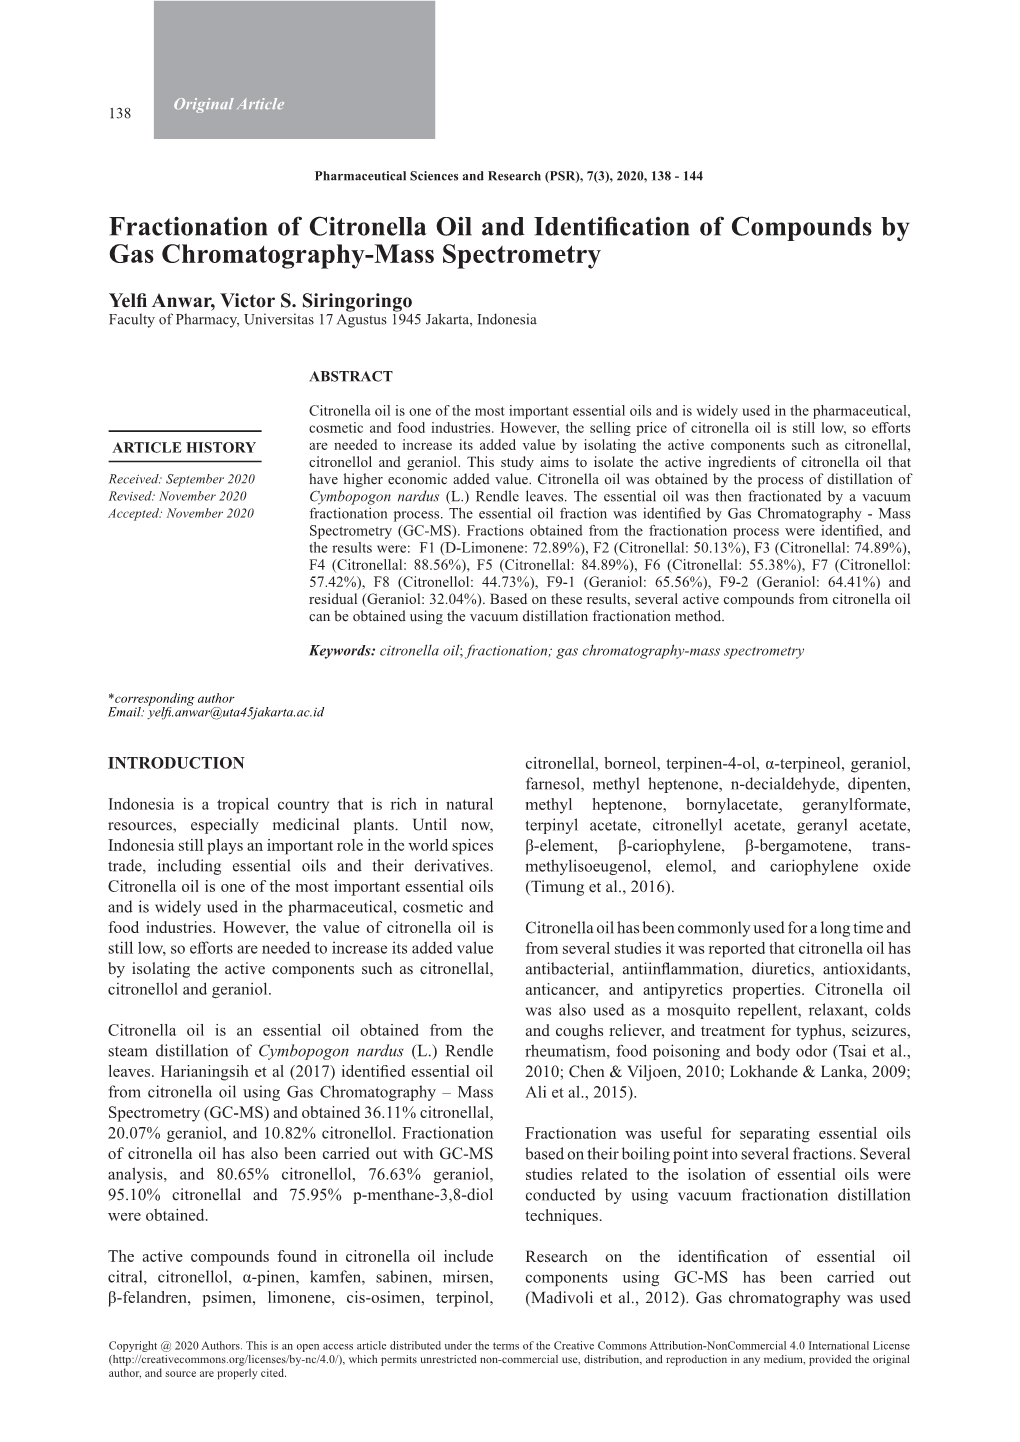 Fractionation of Citronella Oil and Identification of Compounds by Gas Chromatography-Mass Spectrometry